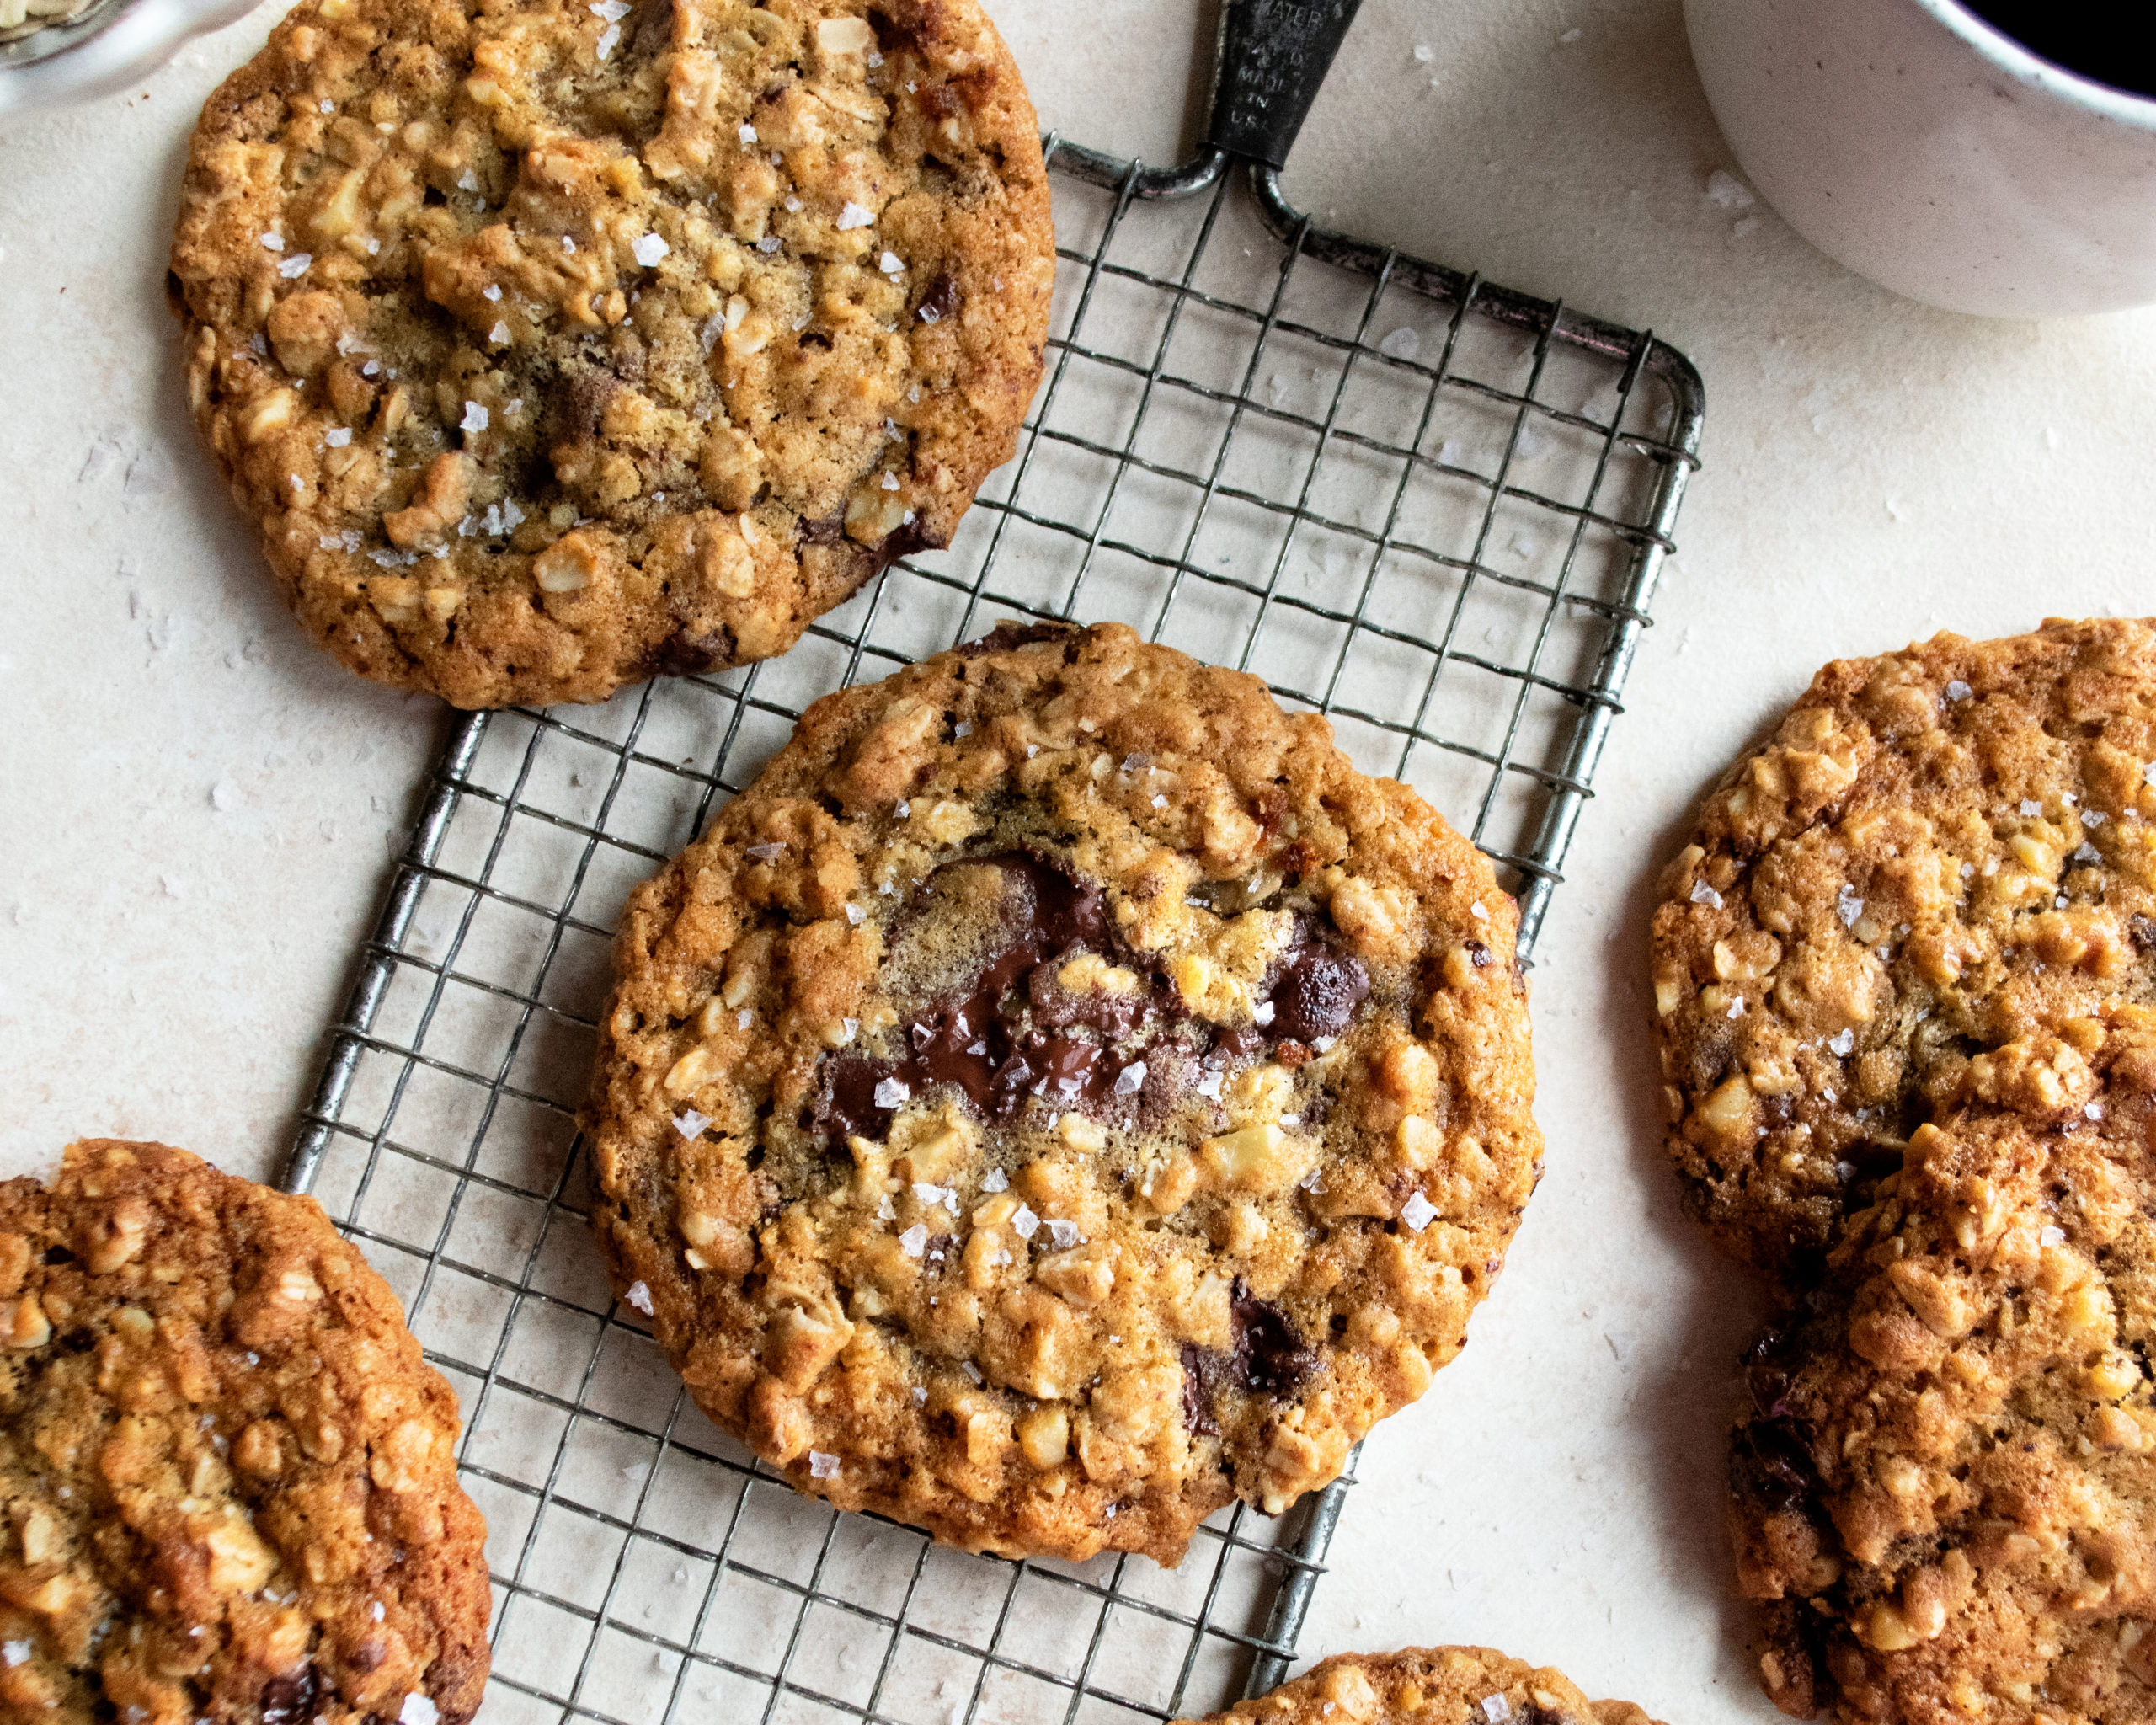 Brown Butter Oatmeal Cookies with Chocolate & Walnuts - The Original Dish